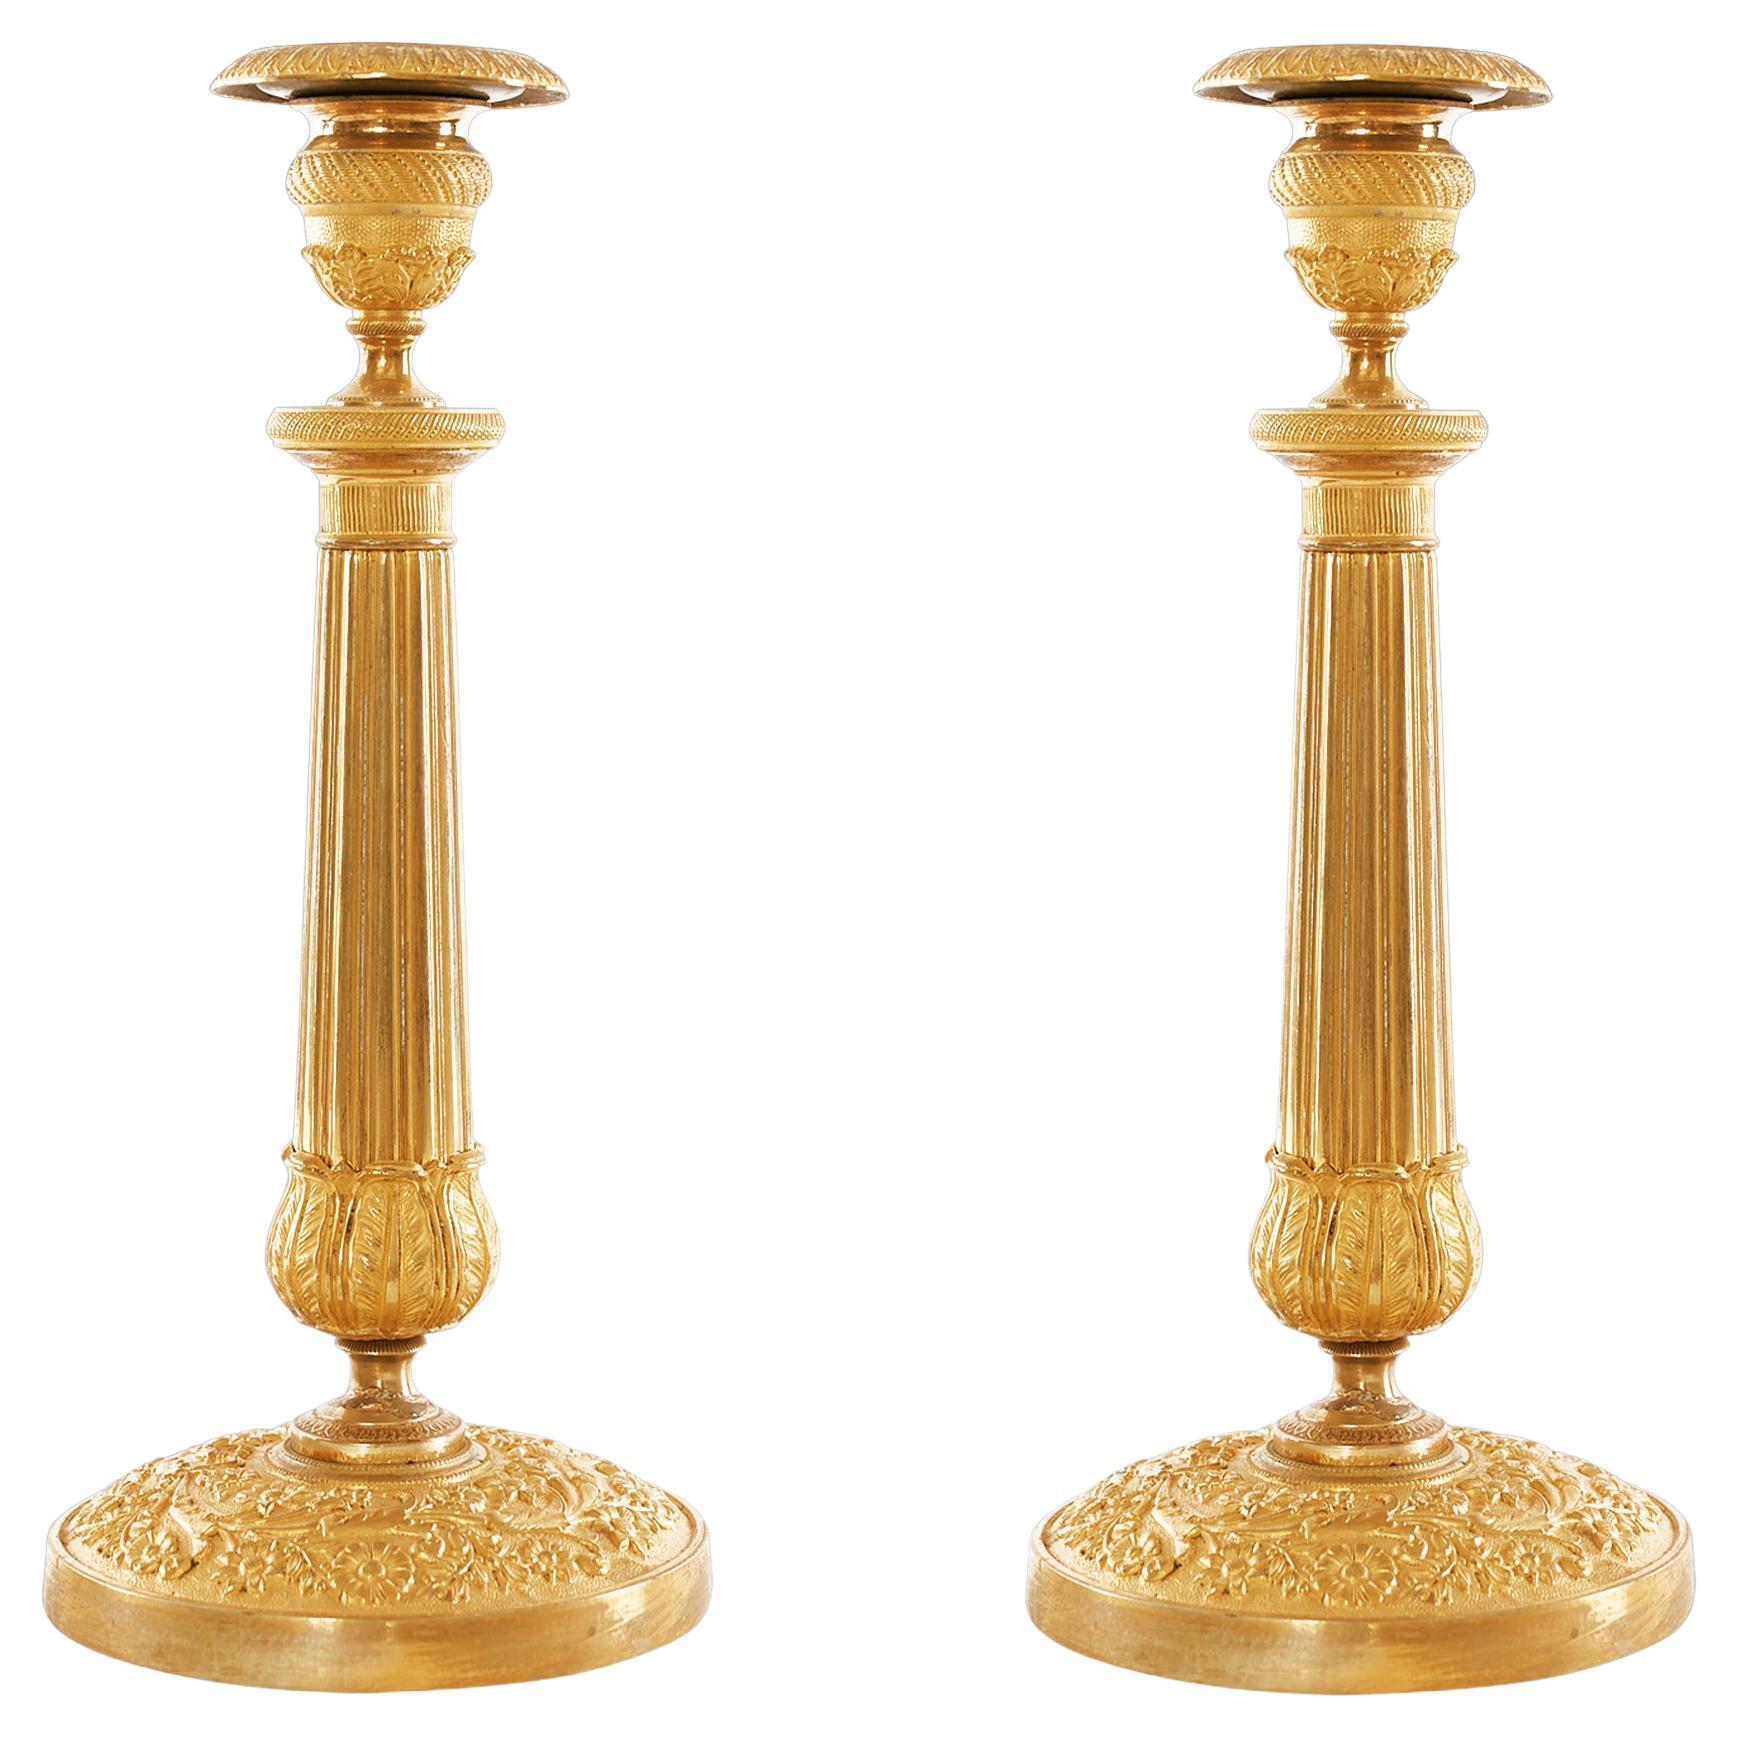 Rare Pair Of Gilt Bronze Empire French Candlesticks After Thomire